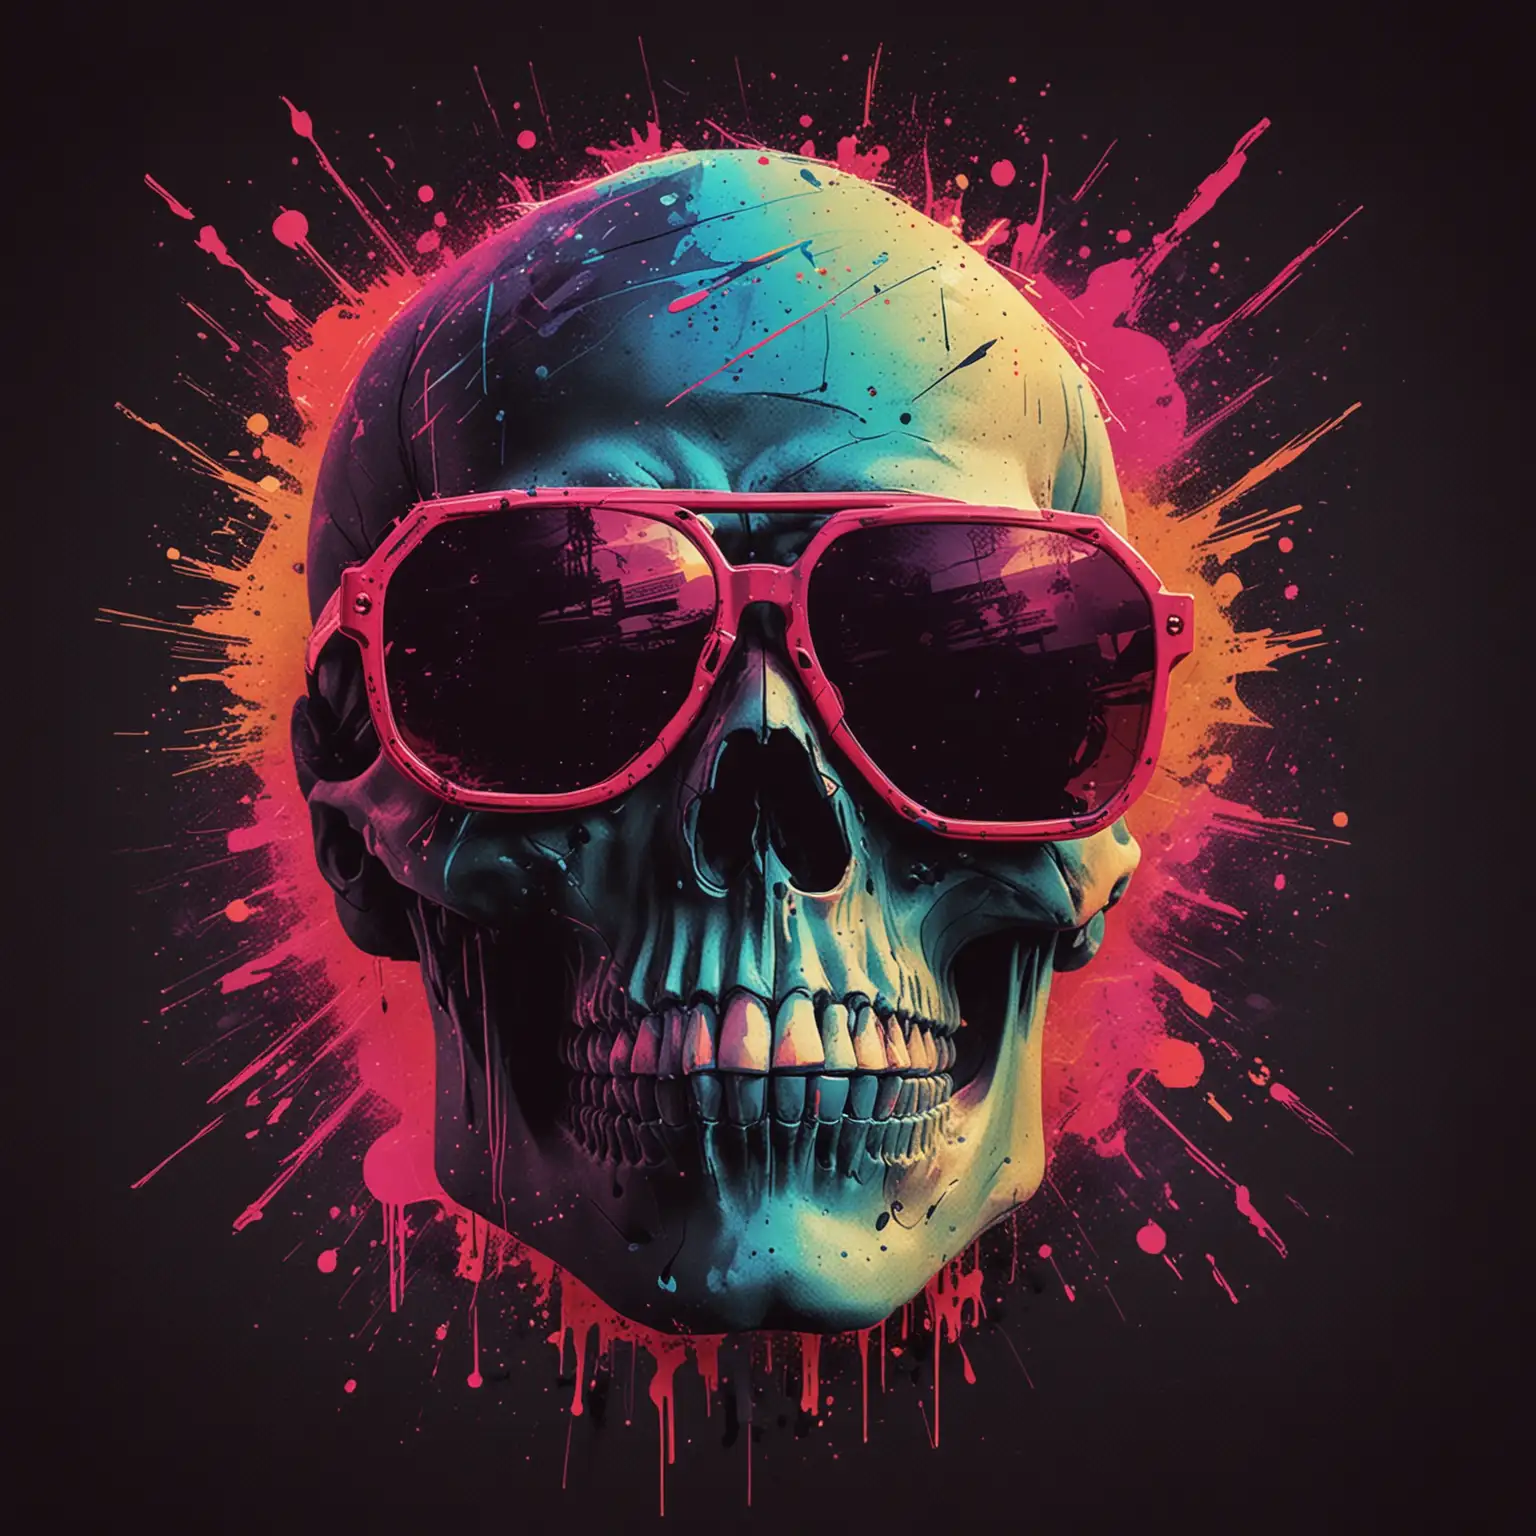 synth neon sunglasses in the style of minimalist 80s trance poster illustration featuring skull and ink splash, neon, bold, color-blocked compositions, geometric, faded to black.